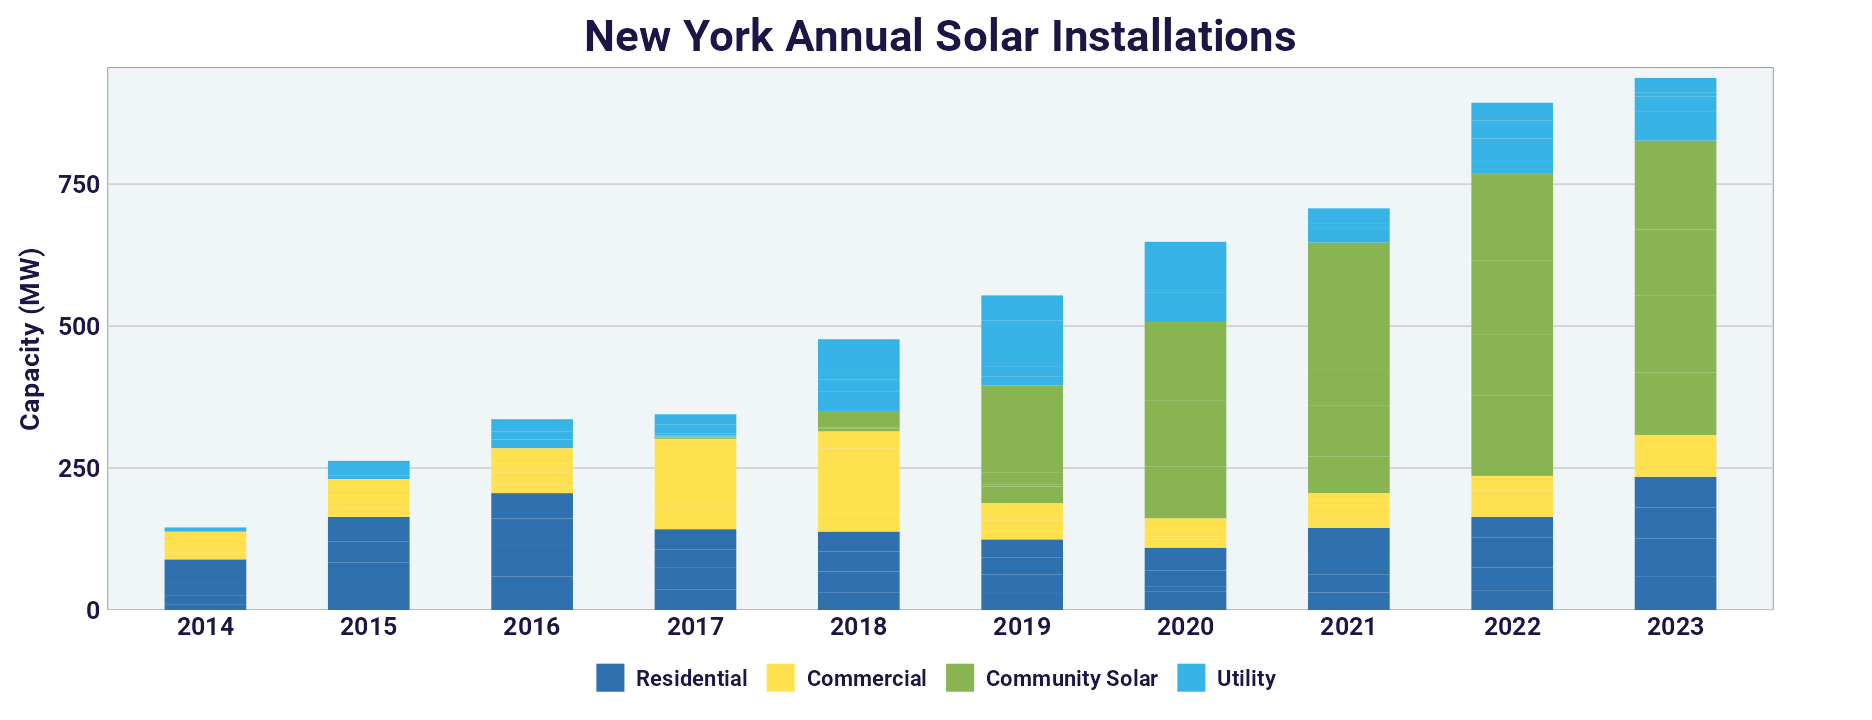 Annual Solar Installations in New York Provided by SEIA.org